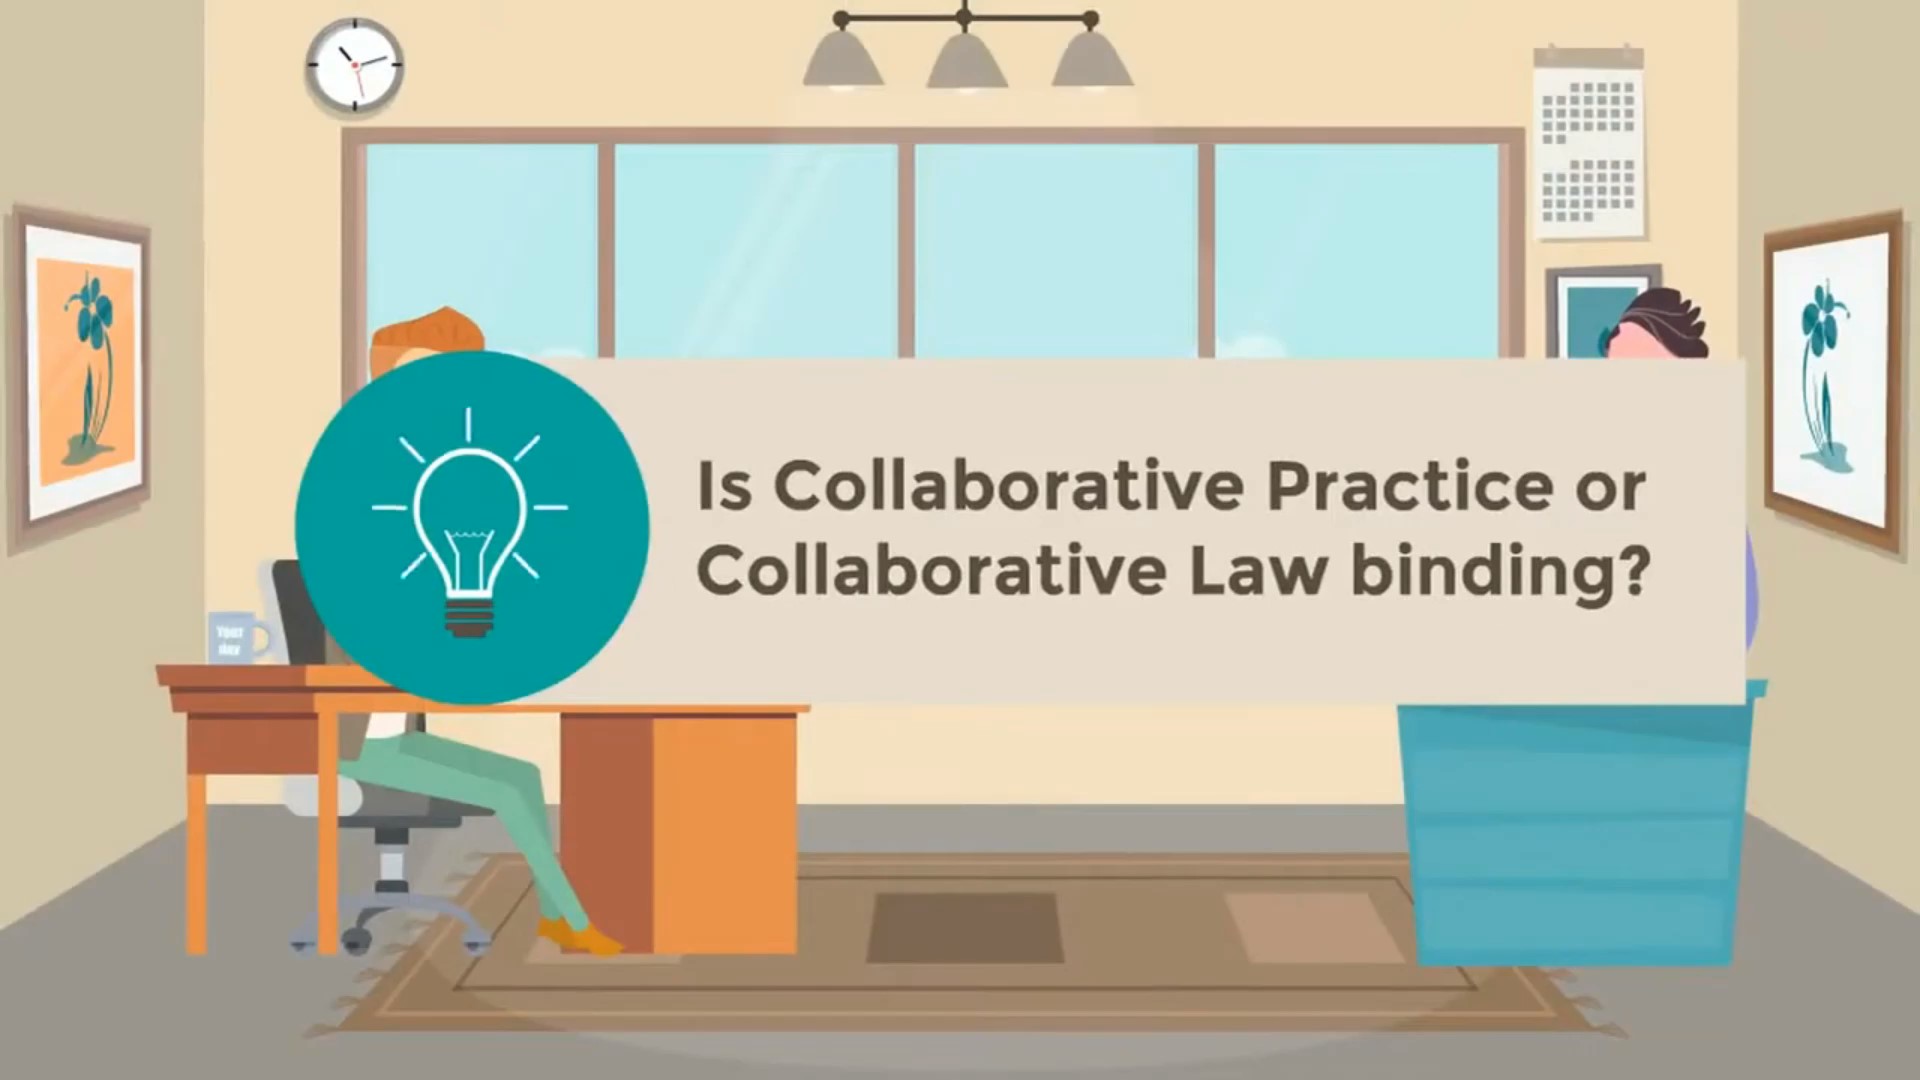 Collaborative Law or Practice Binding